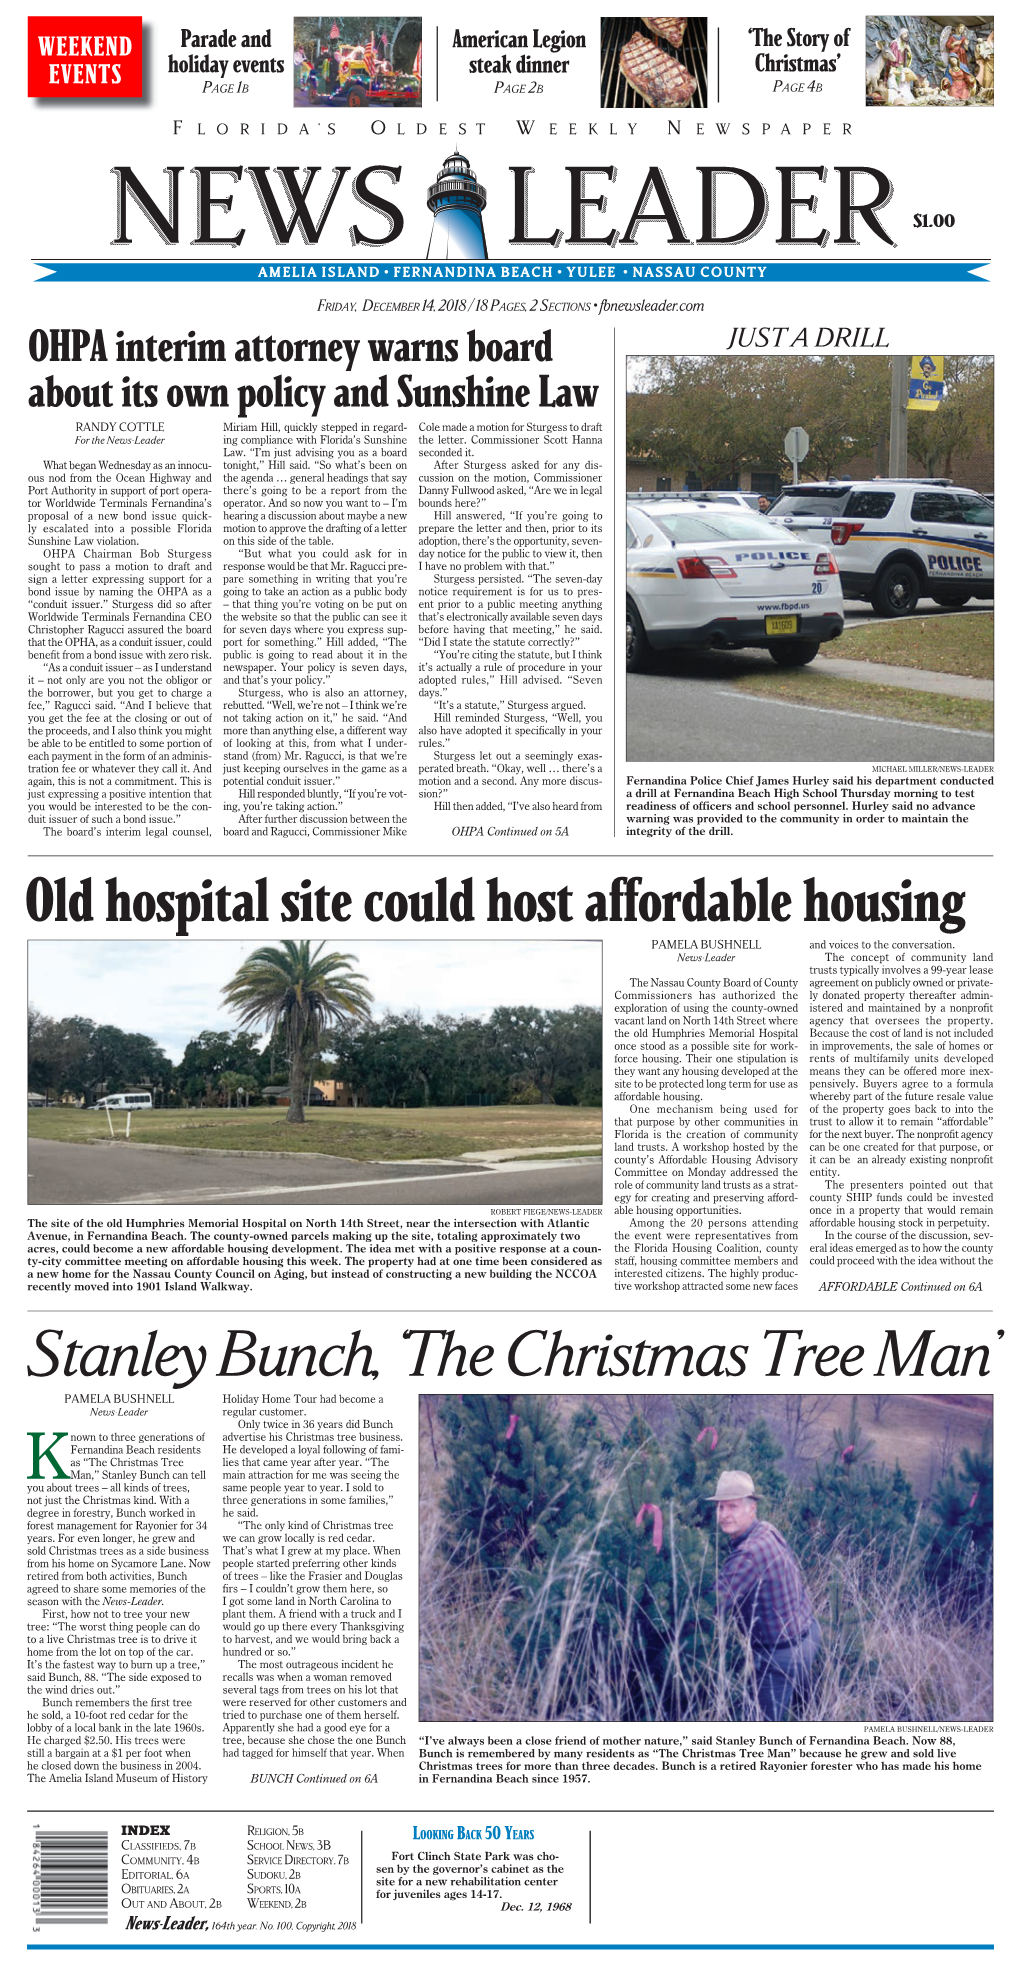 Stanley Bunch, ‘The Christmas Tree Man’ PAMELA BUSHNELL Holiday Home Tour Had Become a News-Leader Regular Customer